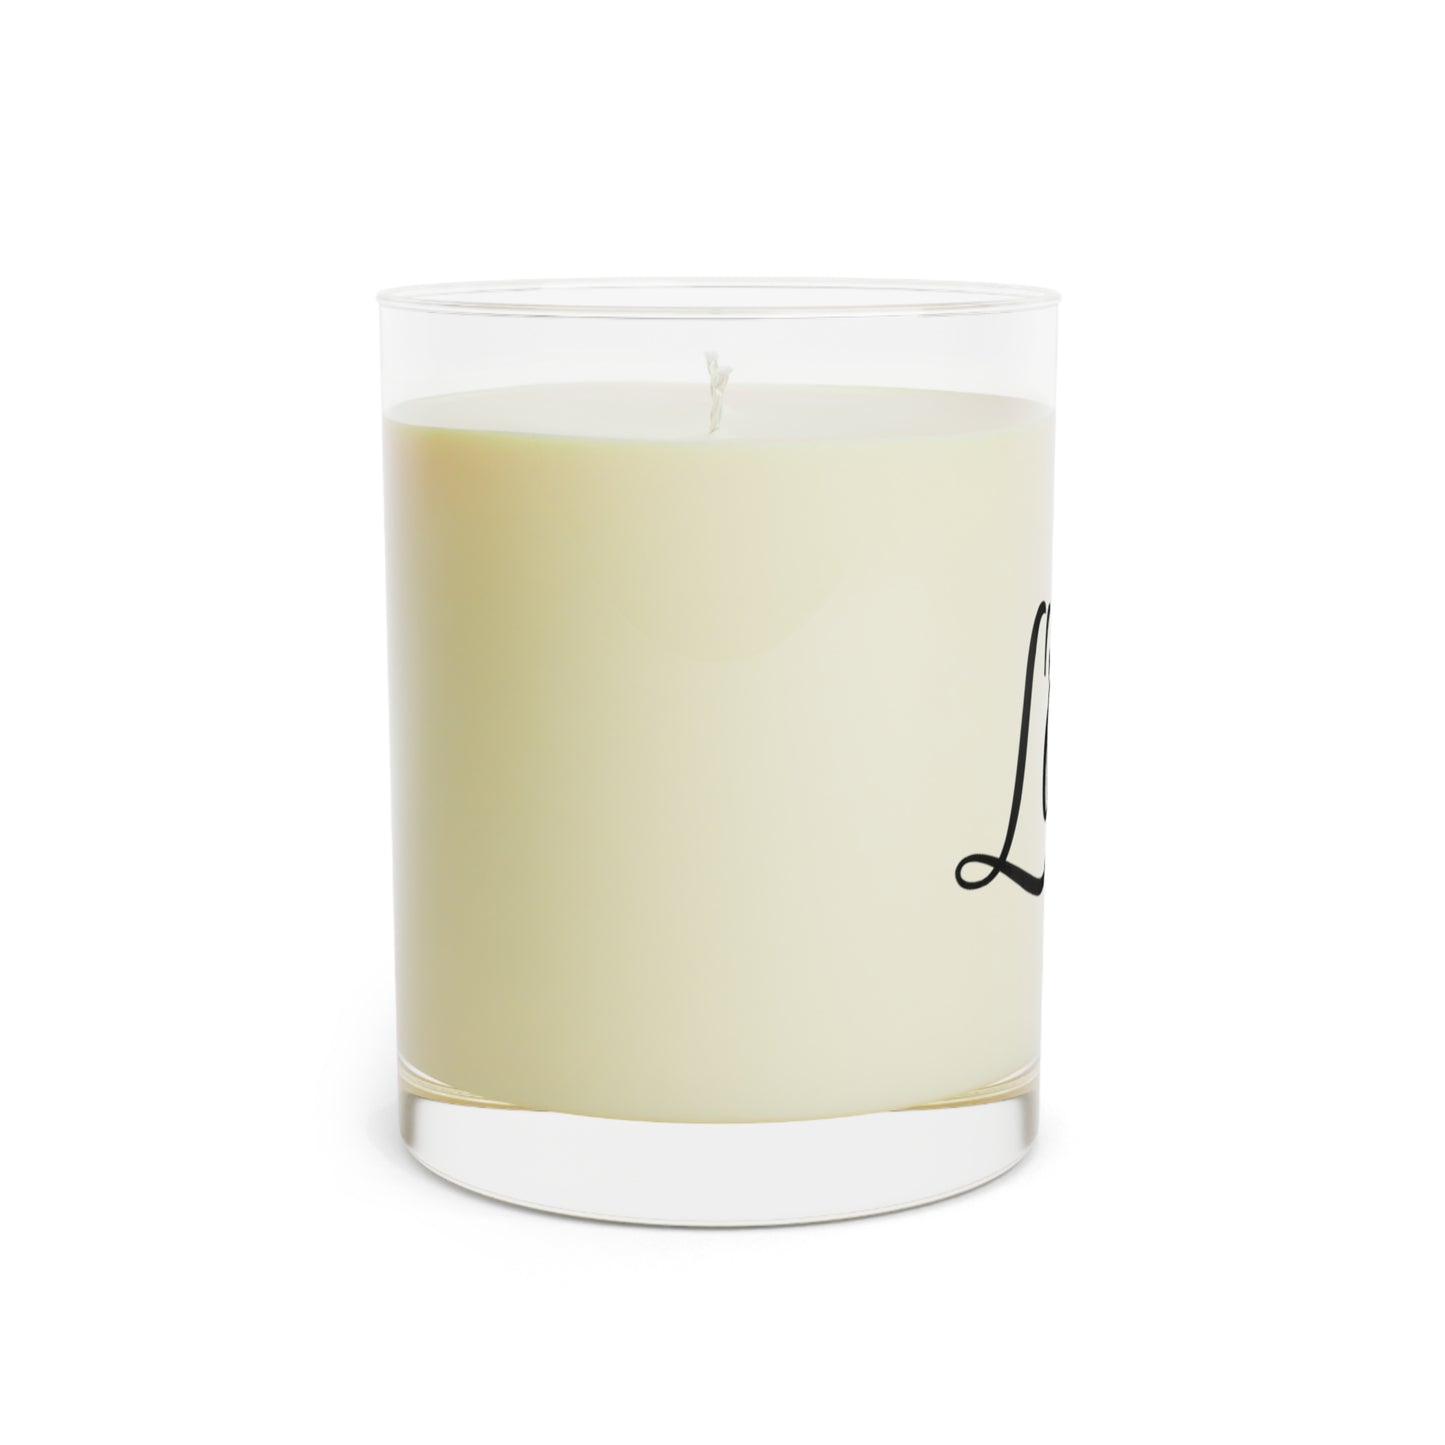 Love - Scented Candle